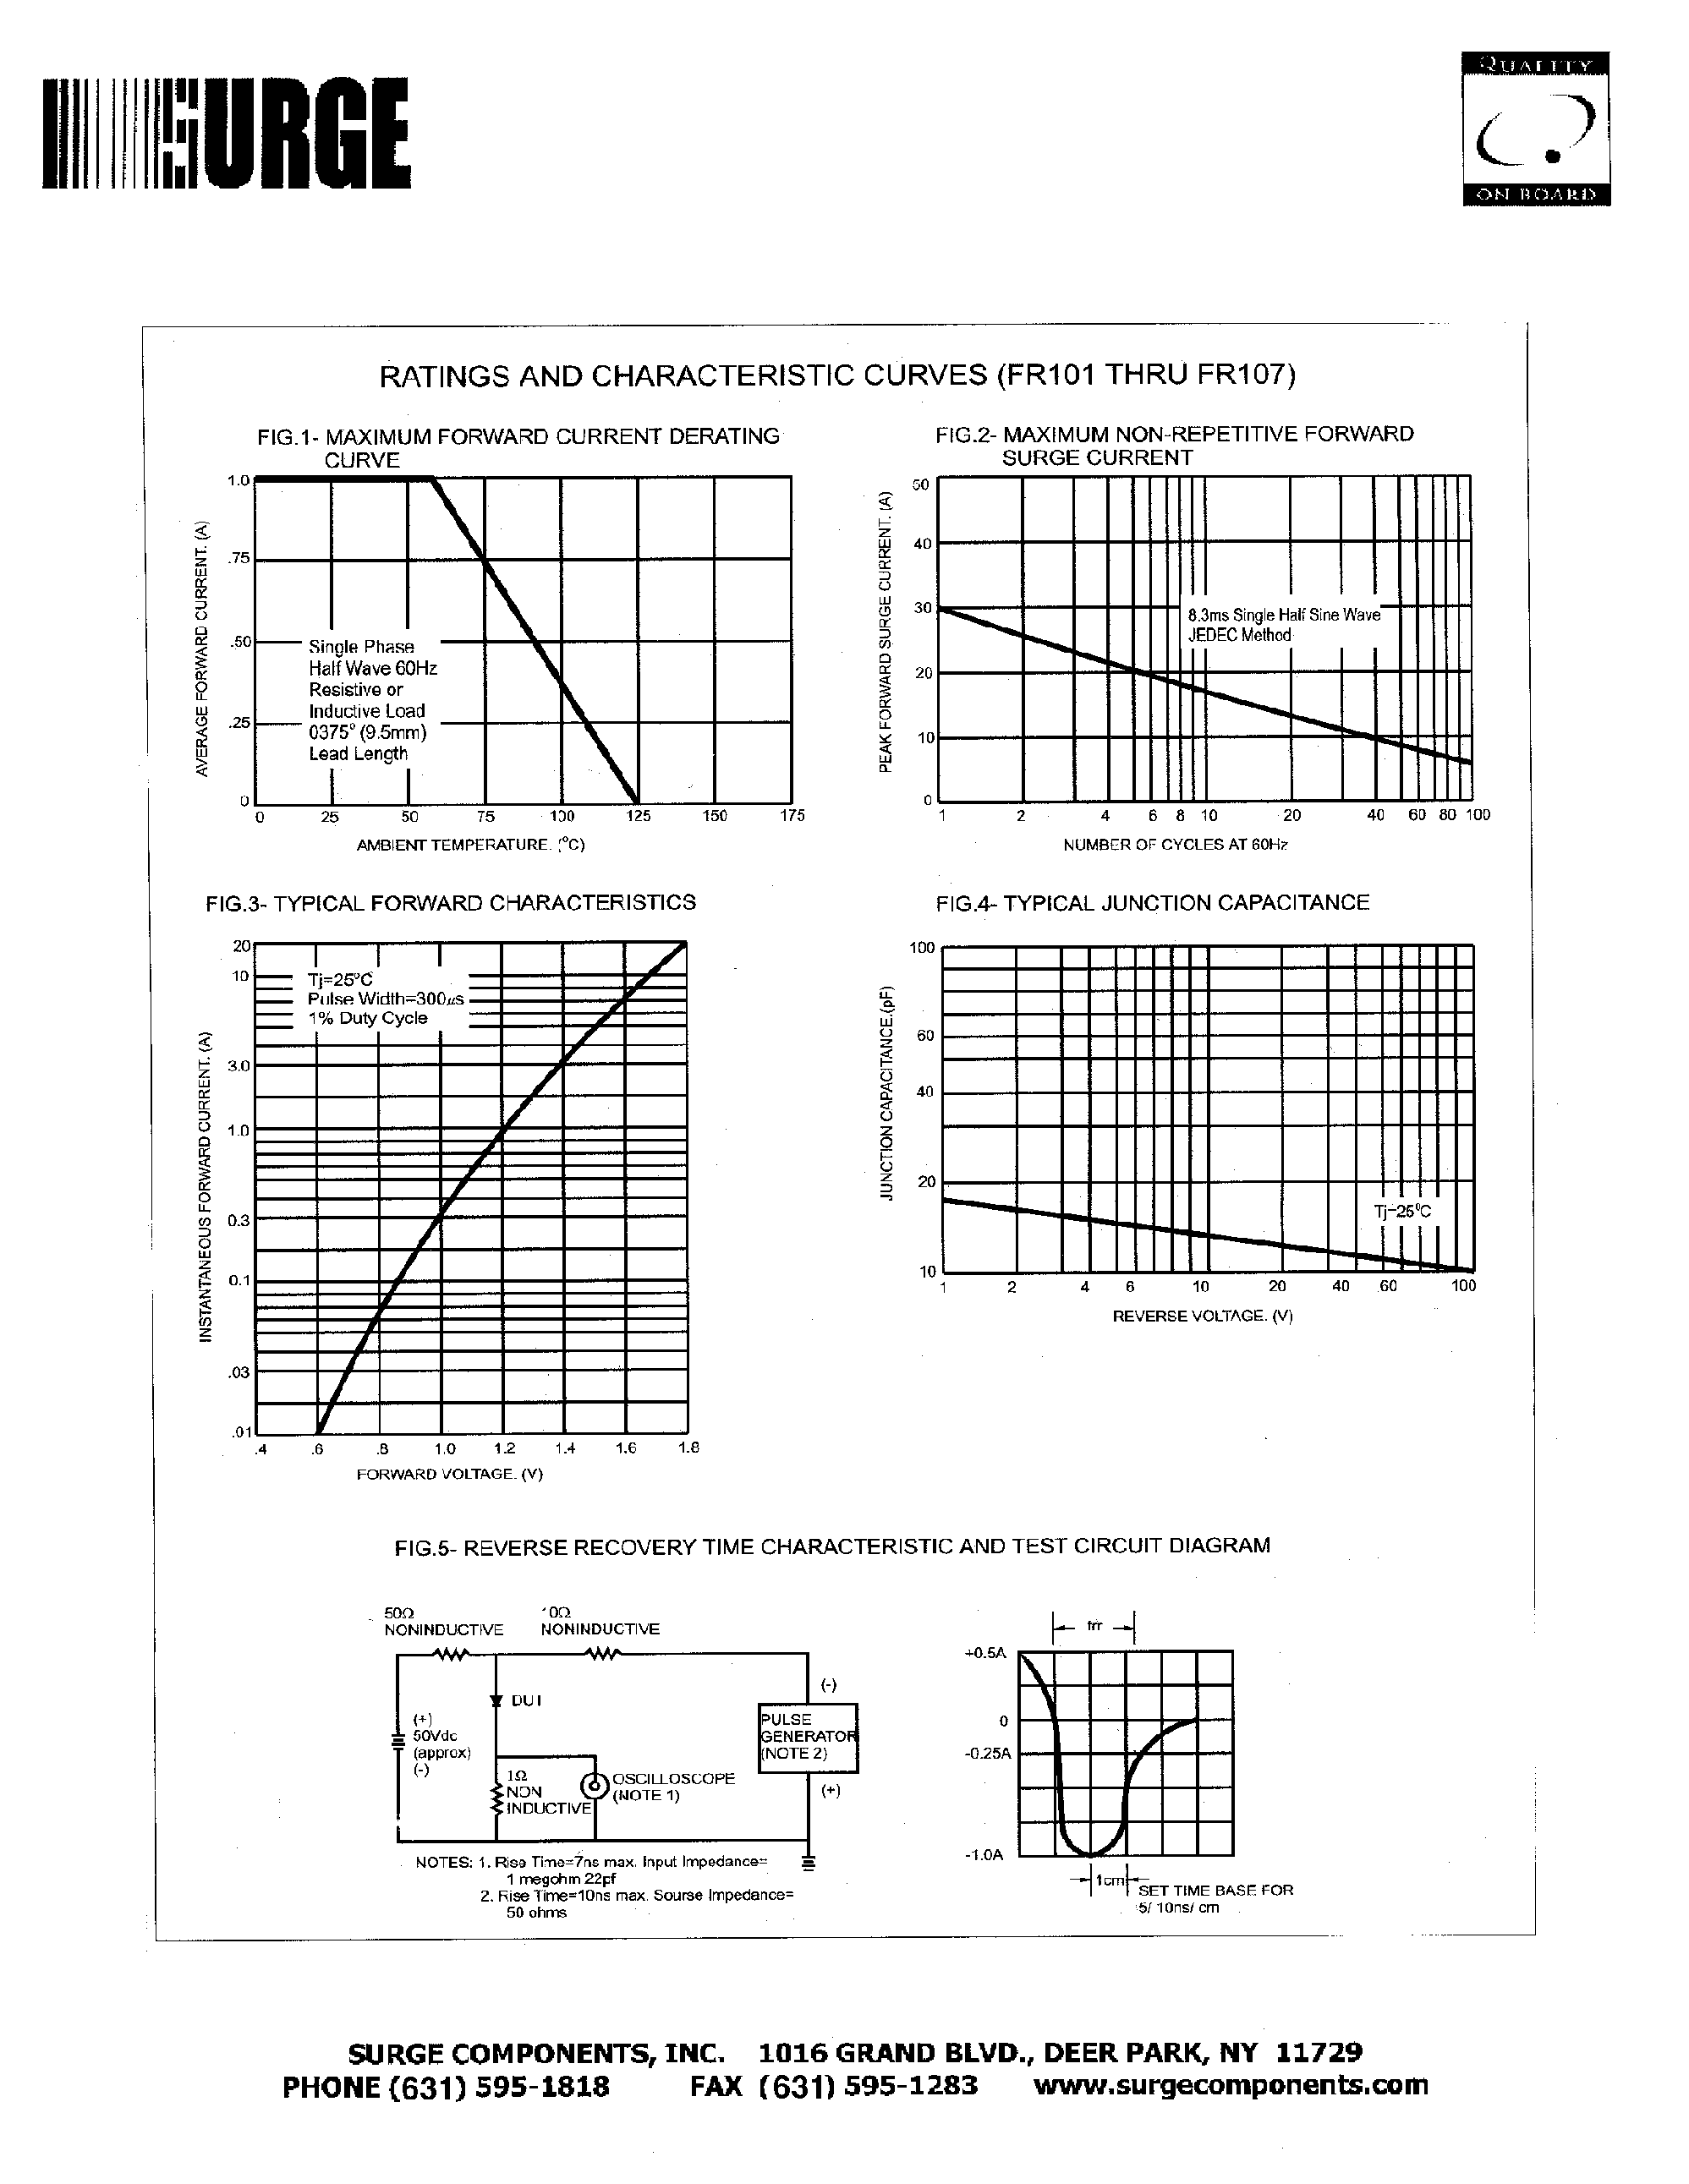 Datasheet FR101 - 1.0 AMP. Fast Recovery Rectifiers page 2